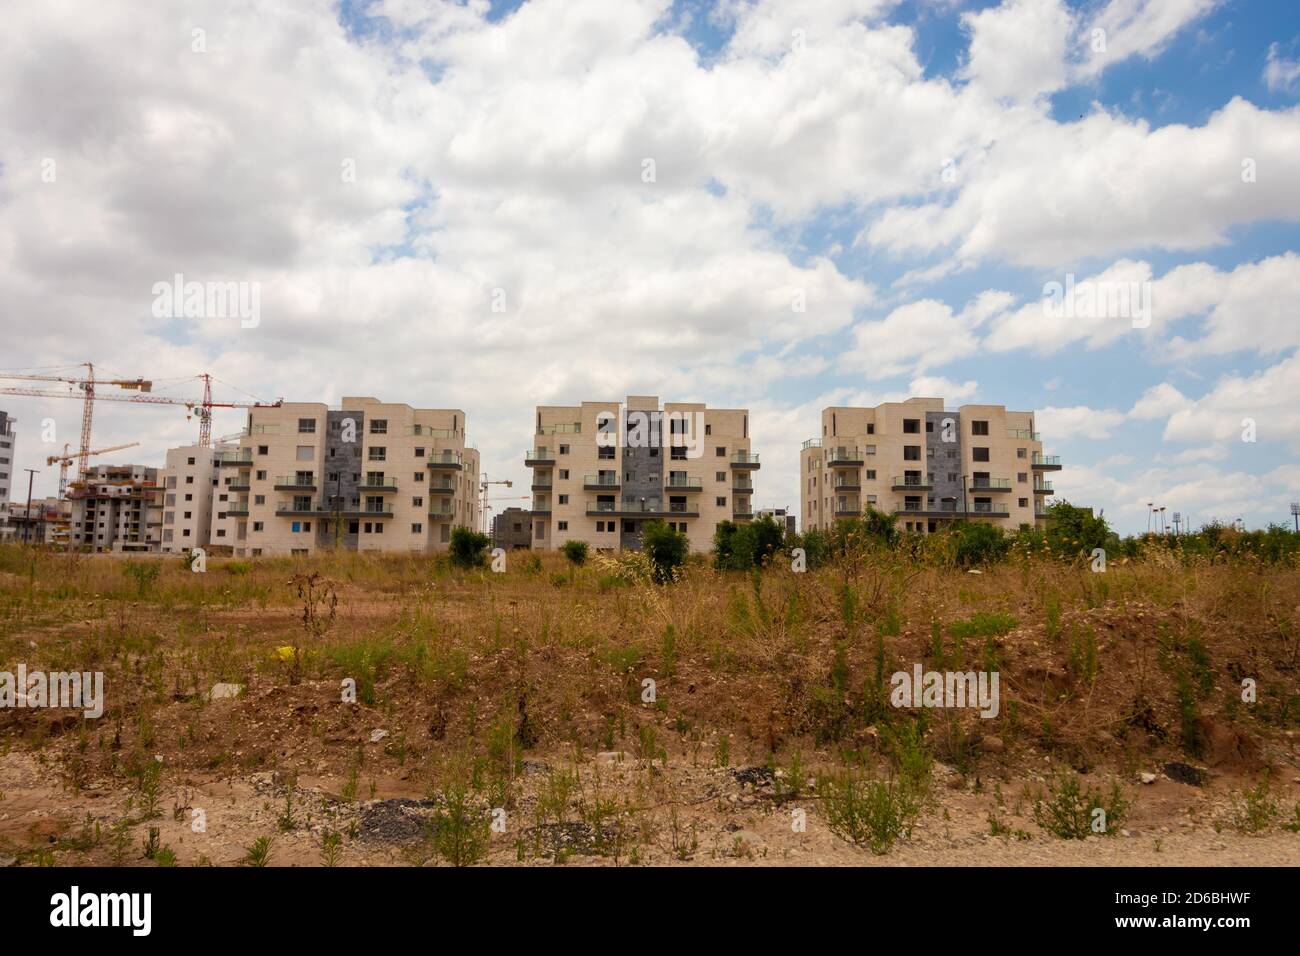 Ganei Ayalon neighborhood at the entrance to Moshav Ahisamakh, new buildings against a background of cloudy skies Stock Photo